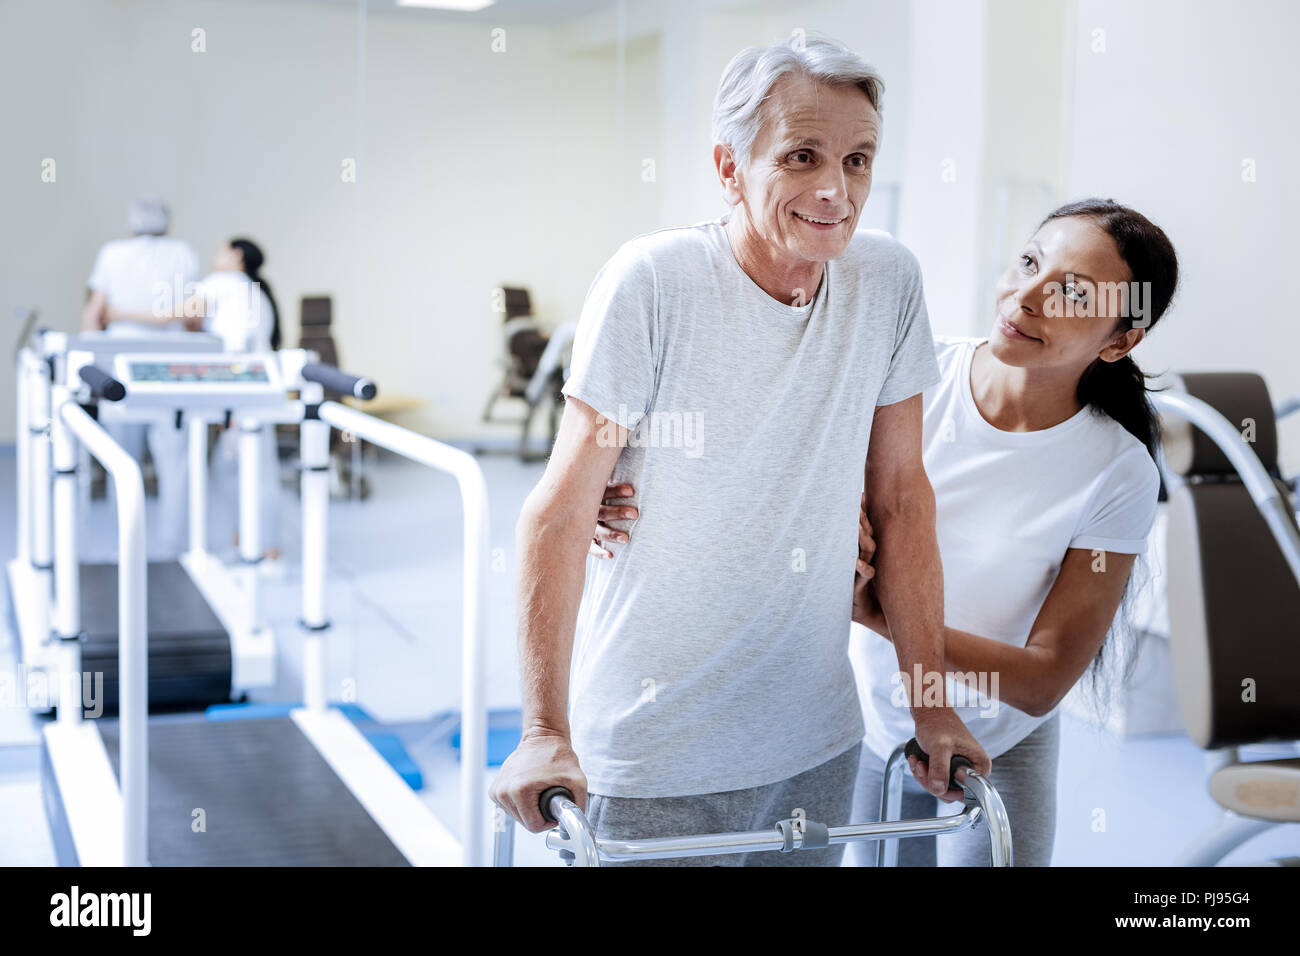 Cheerful retired man having progress while being in a rehabilitation center Stock Photo